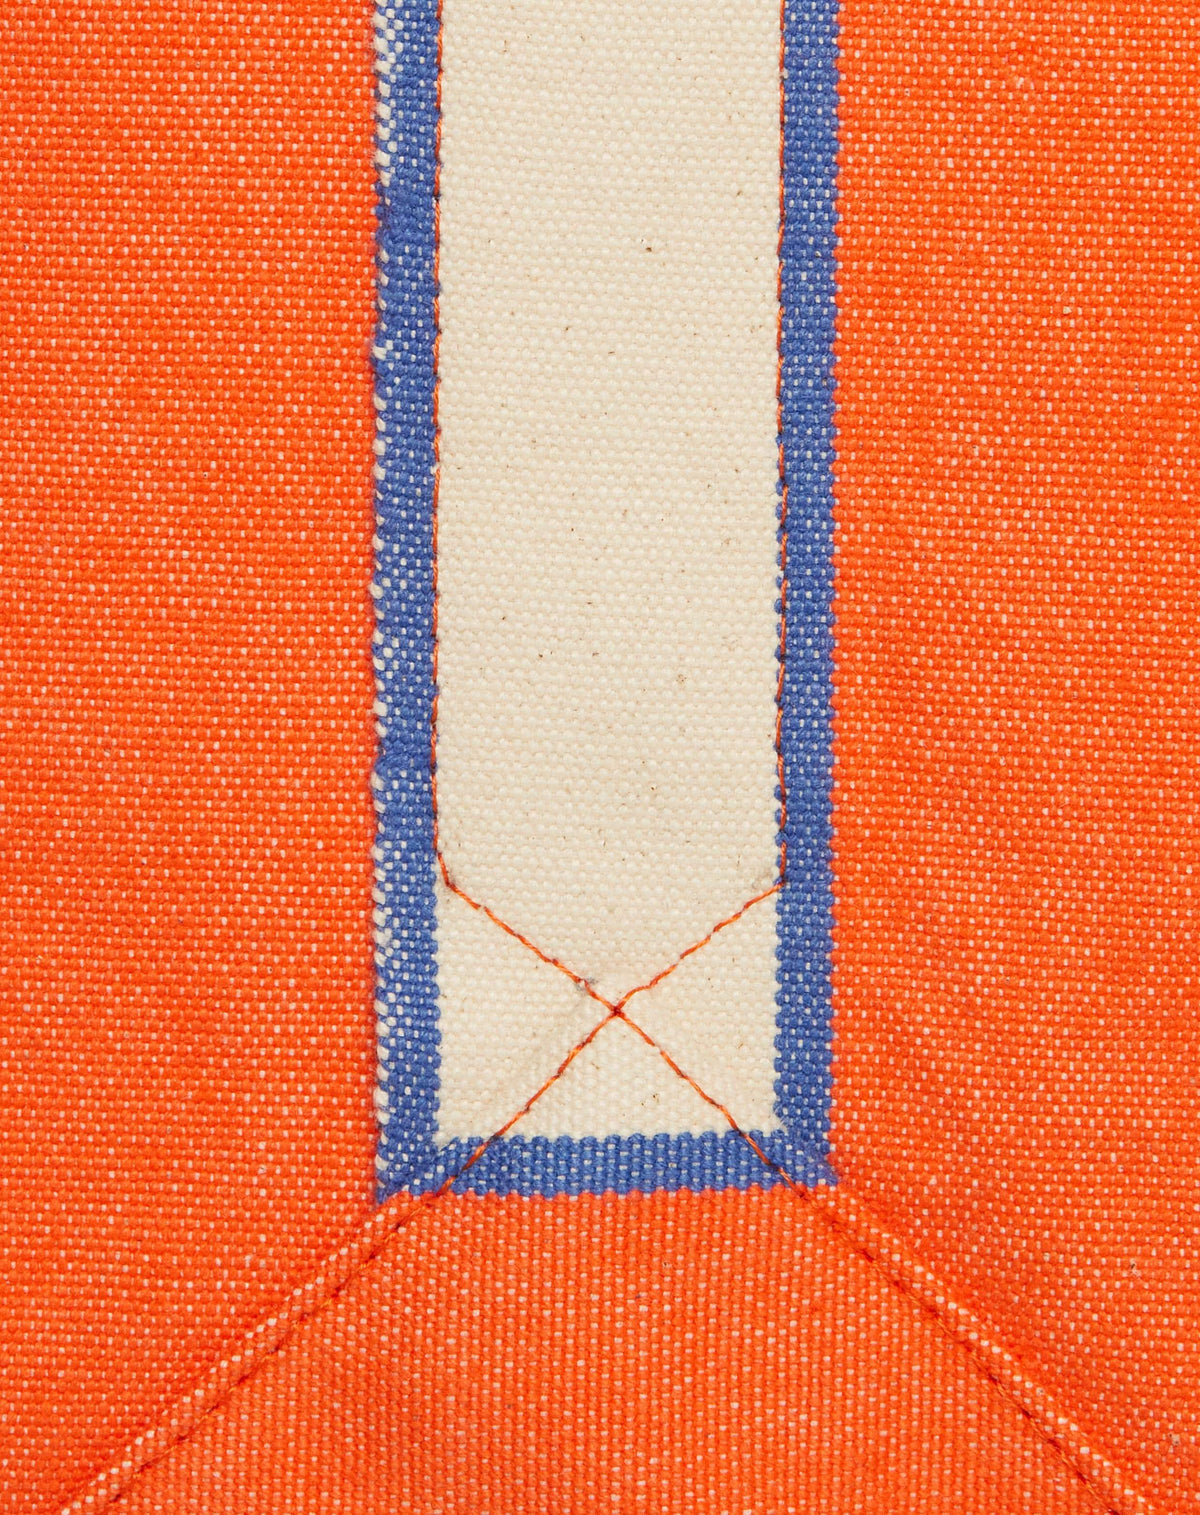 Image of orange canvas with contrasting stripe and stitching detail.